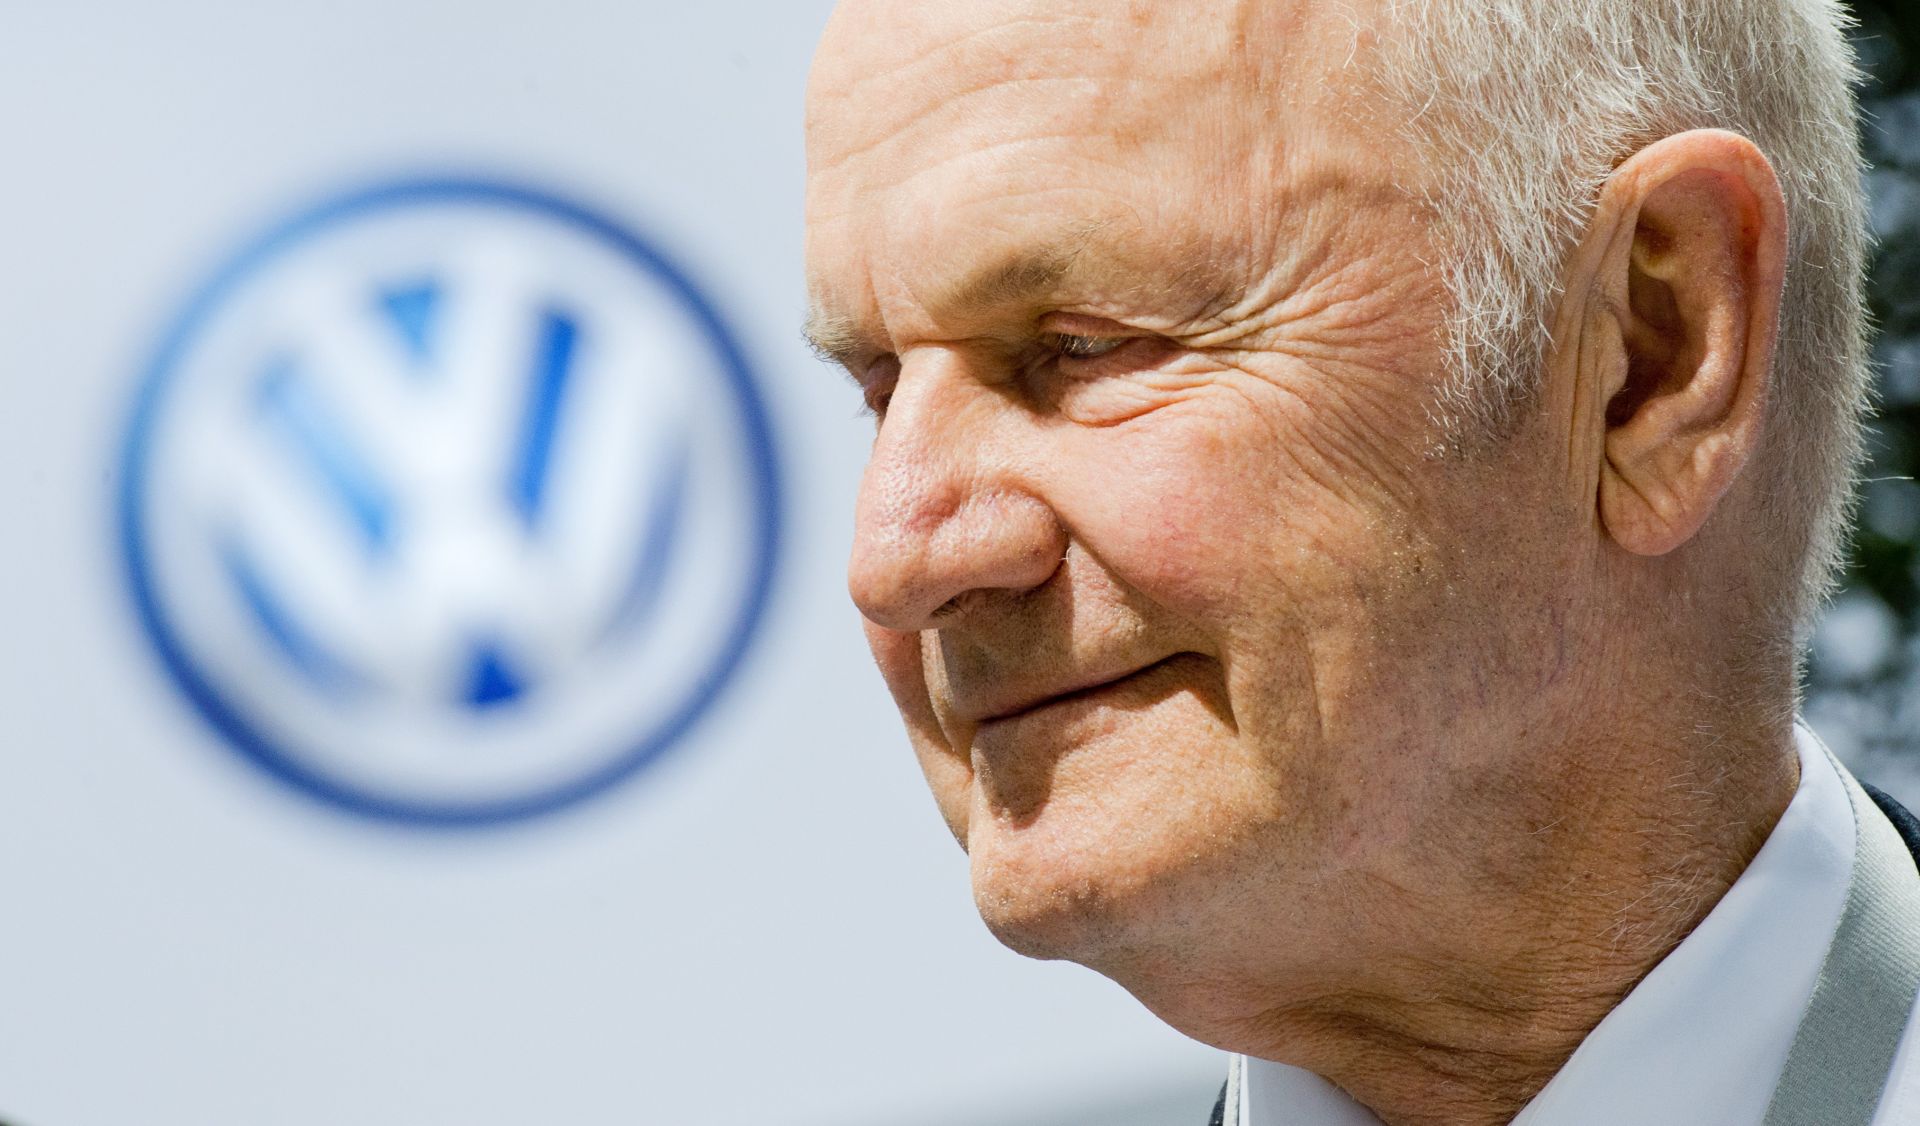 epa07795944 (FILE) - Chairman of the supervisory board of Volkswagen group, Ferdinand Piech in front of a VW logo before the Volkswagen AG general meeting in Hanover, Germany, 13 May 2014 (reissued 26 August 2019). According to reports, Ferdinand Piech died on 26 August 2019 at the age of 82. Piech was a grandson of legendary Ferdinand Porsche and longtime chairman of Volkswagen (VW) both executive and supervisory boards.  EPA/JULIAN STRATENSCHULTE  GERMANY OUT *** Local Caption *** 53394194